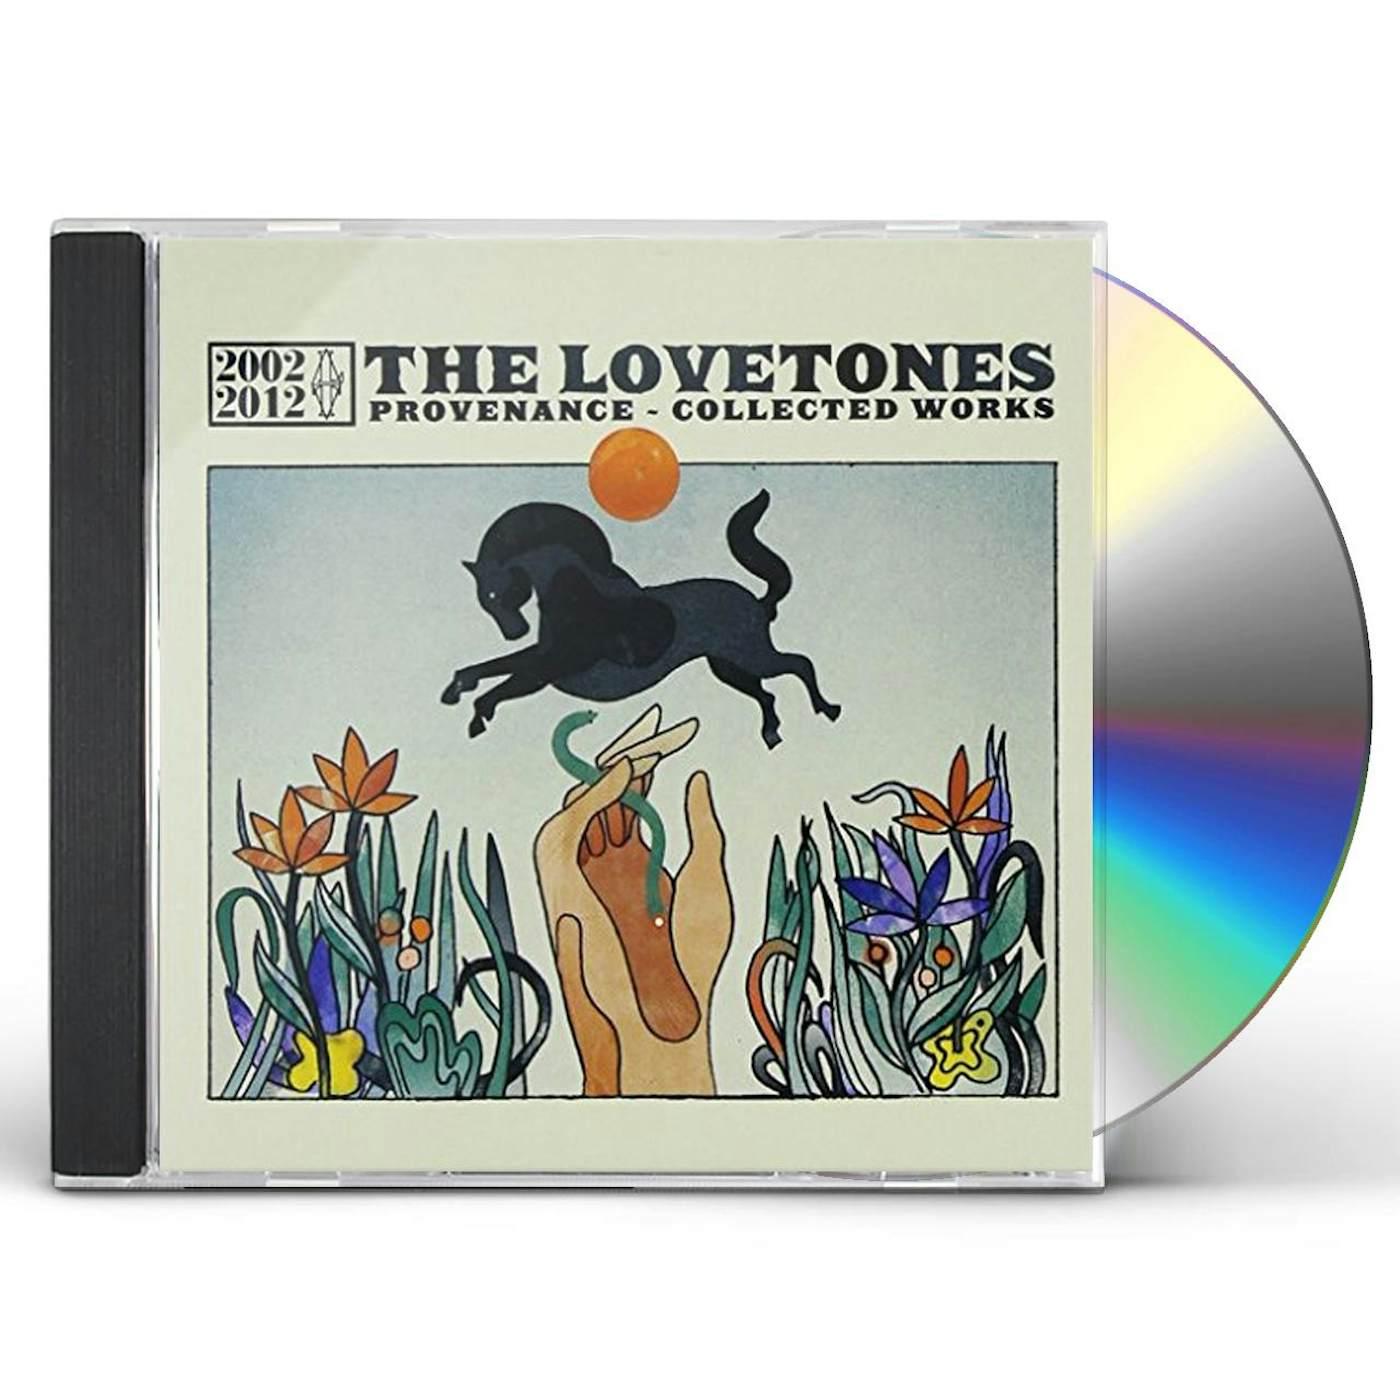 The Lovetones PROVENENCE-COLLECTED WORKS CD